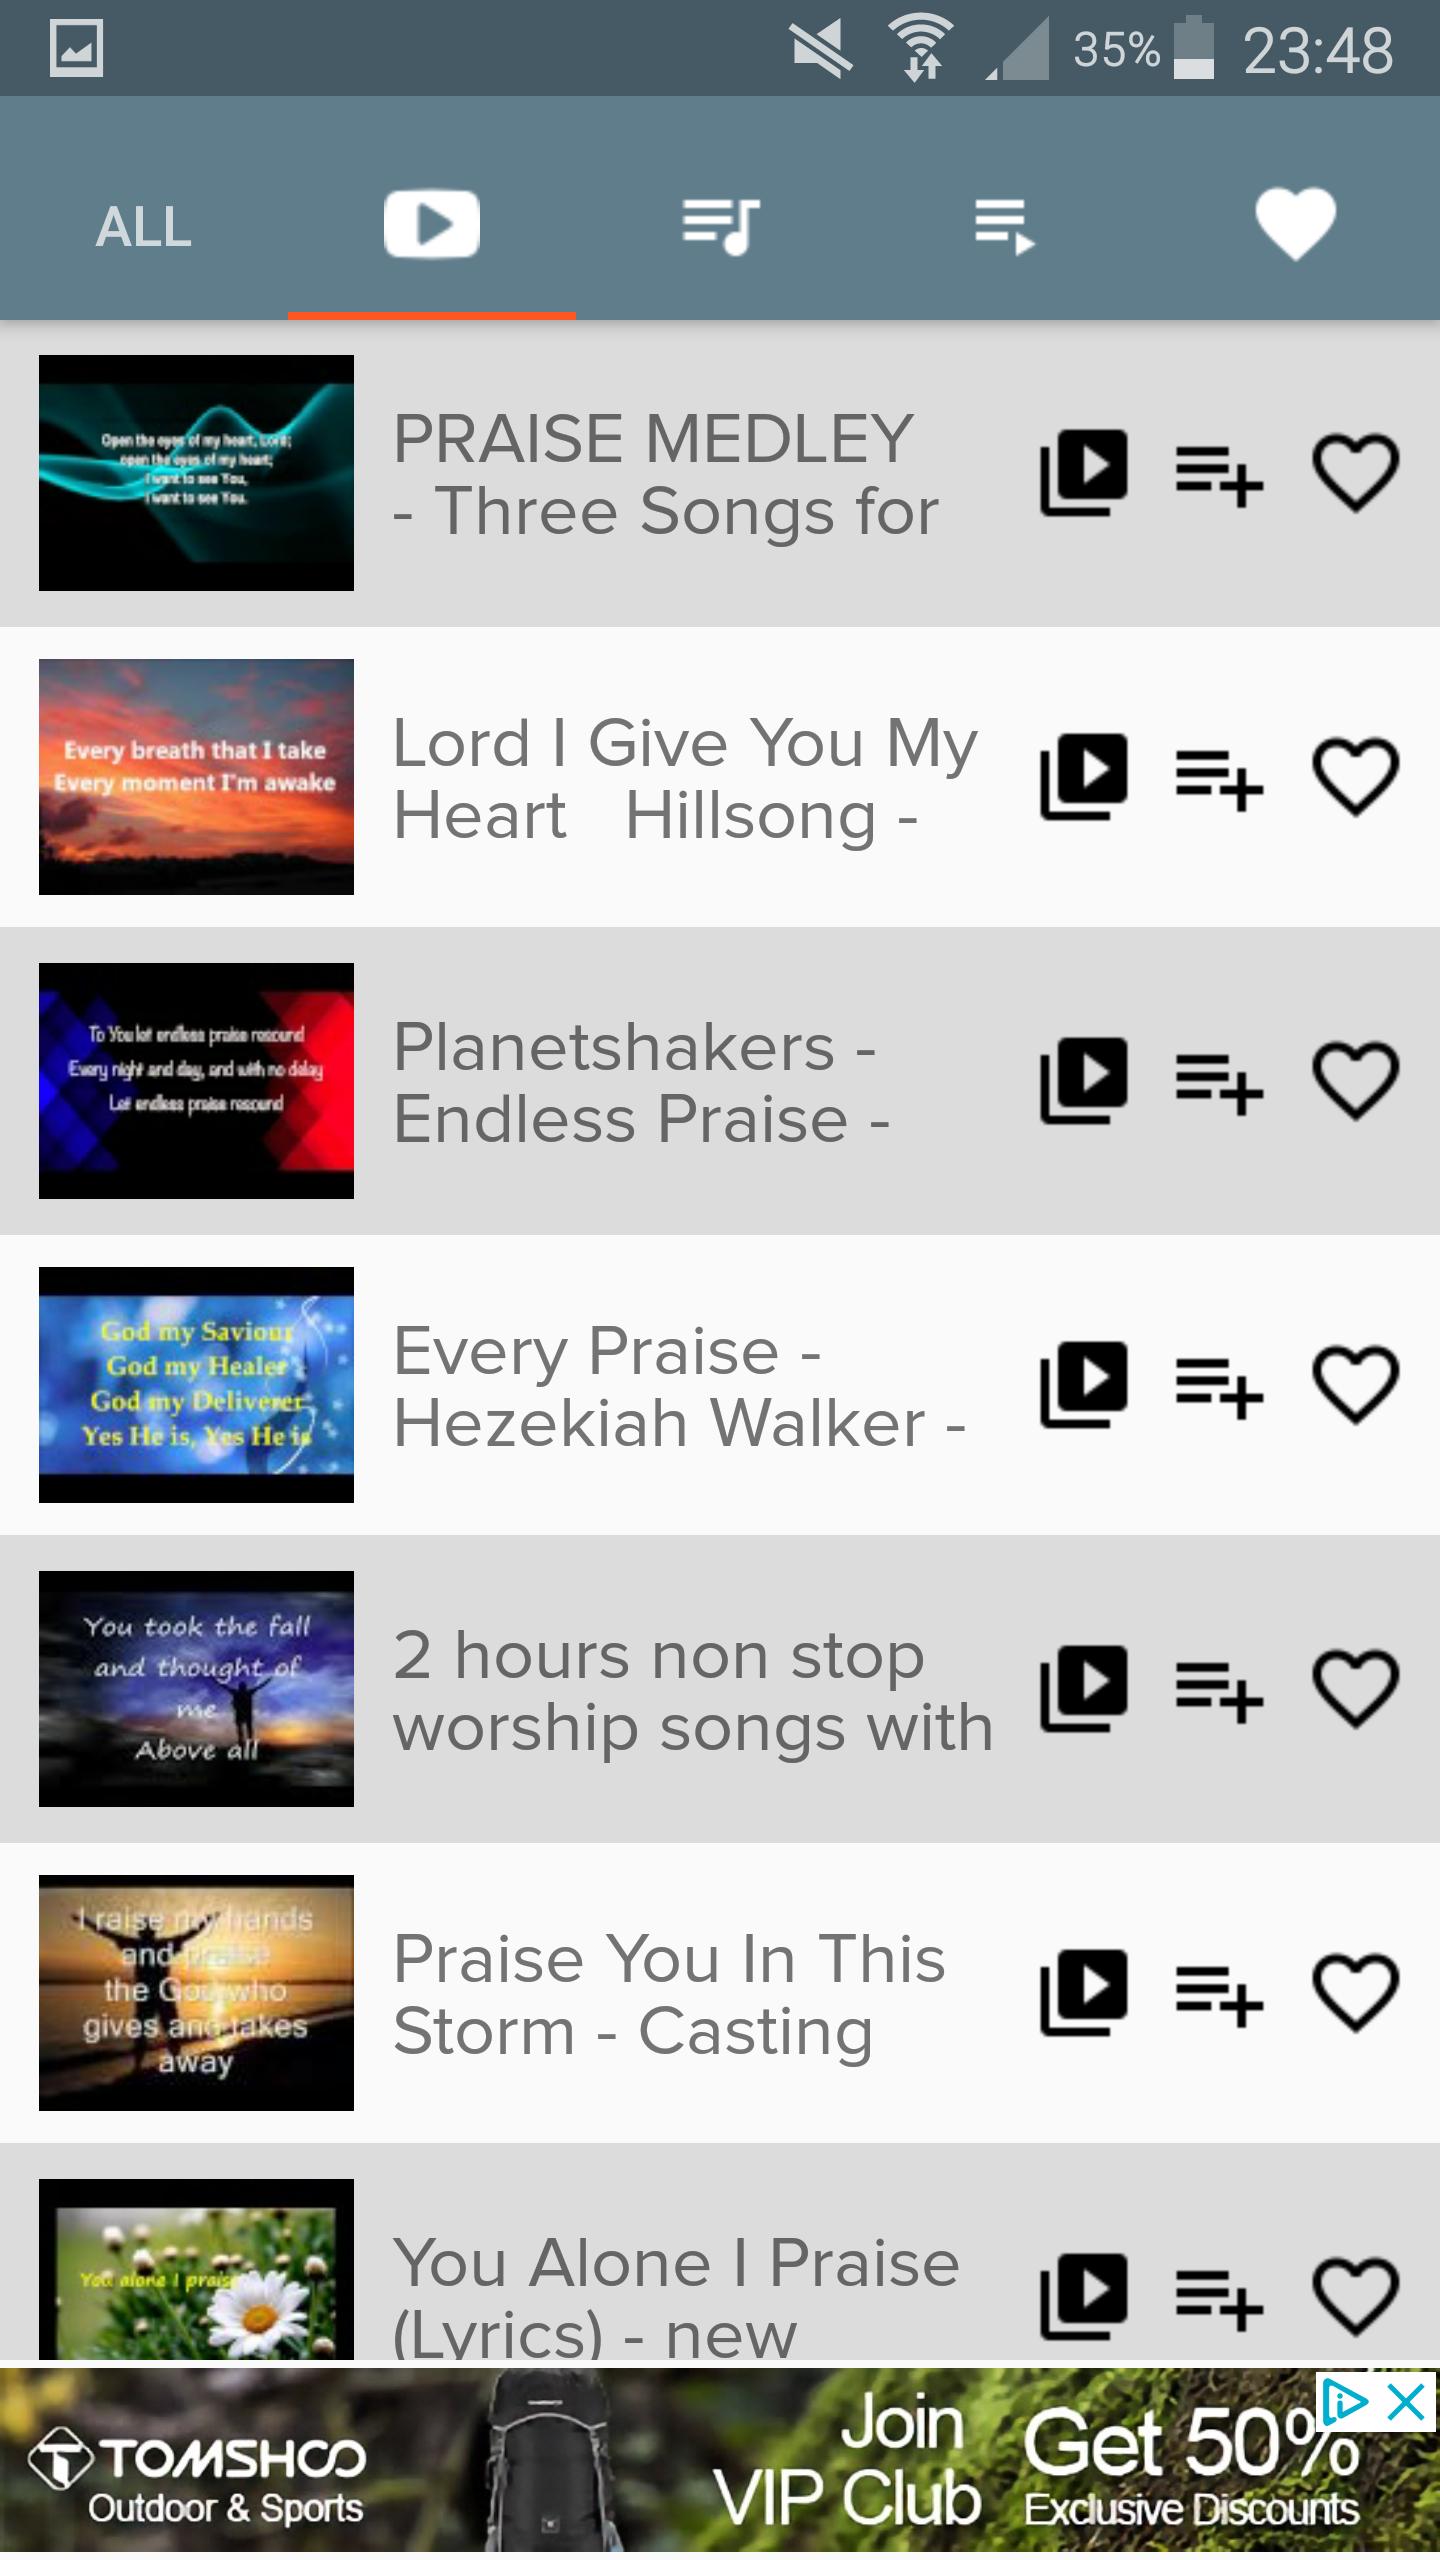 Christian Tube Worship And Praise Songs For Android Apk Download - download mp3 god church song id roblox 2018 free